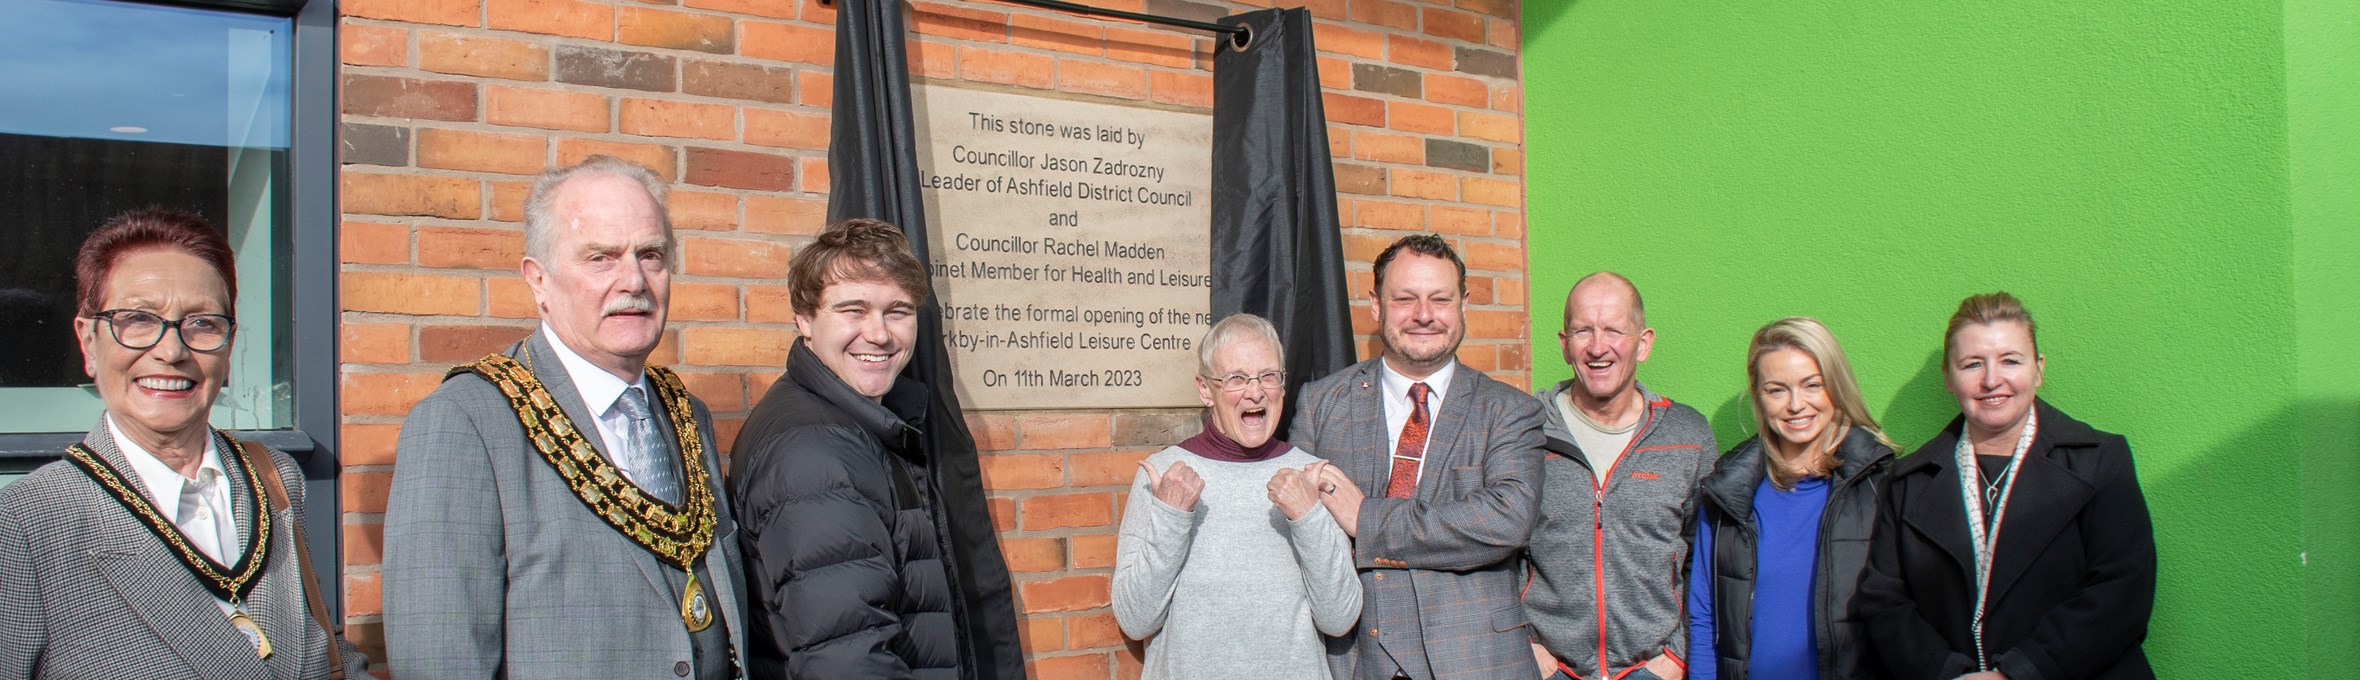 Invited guests unveil the opening plaque at Kirkby Leisure Centre